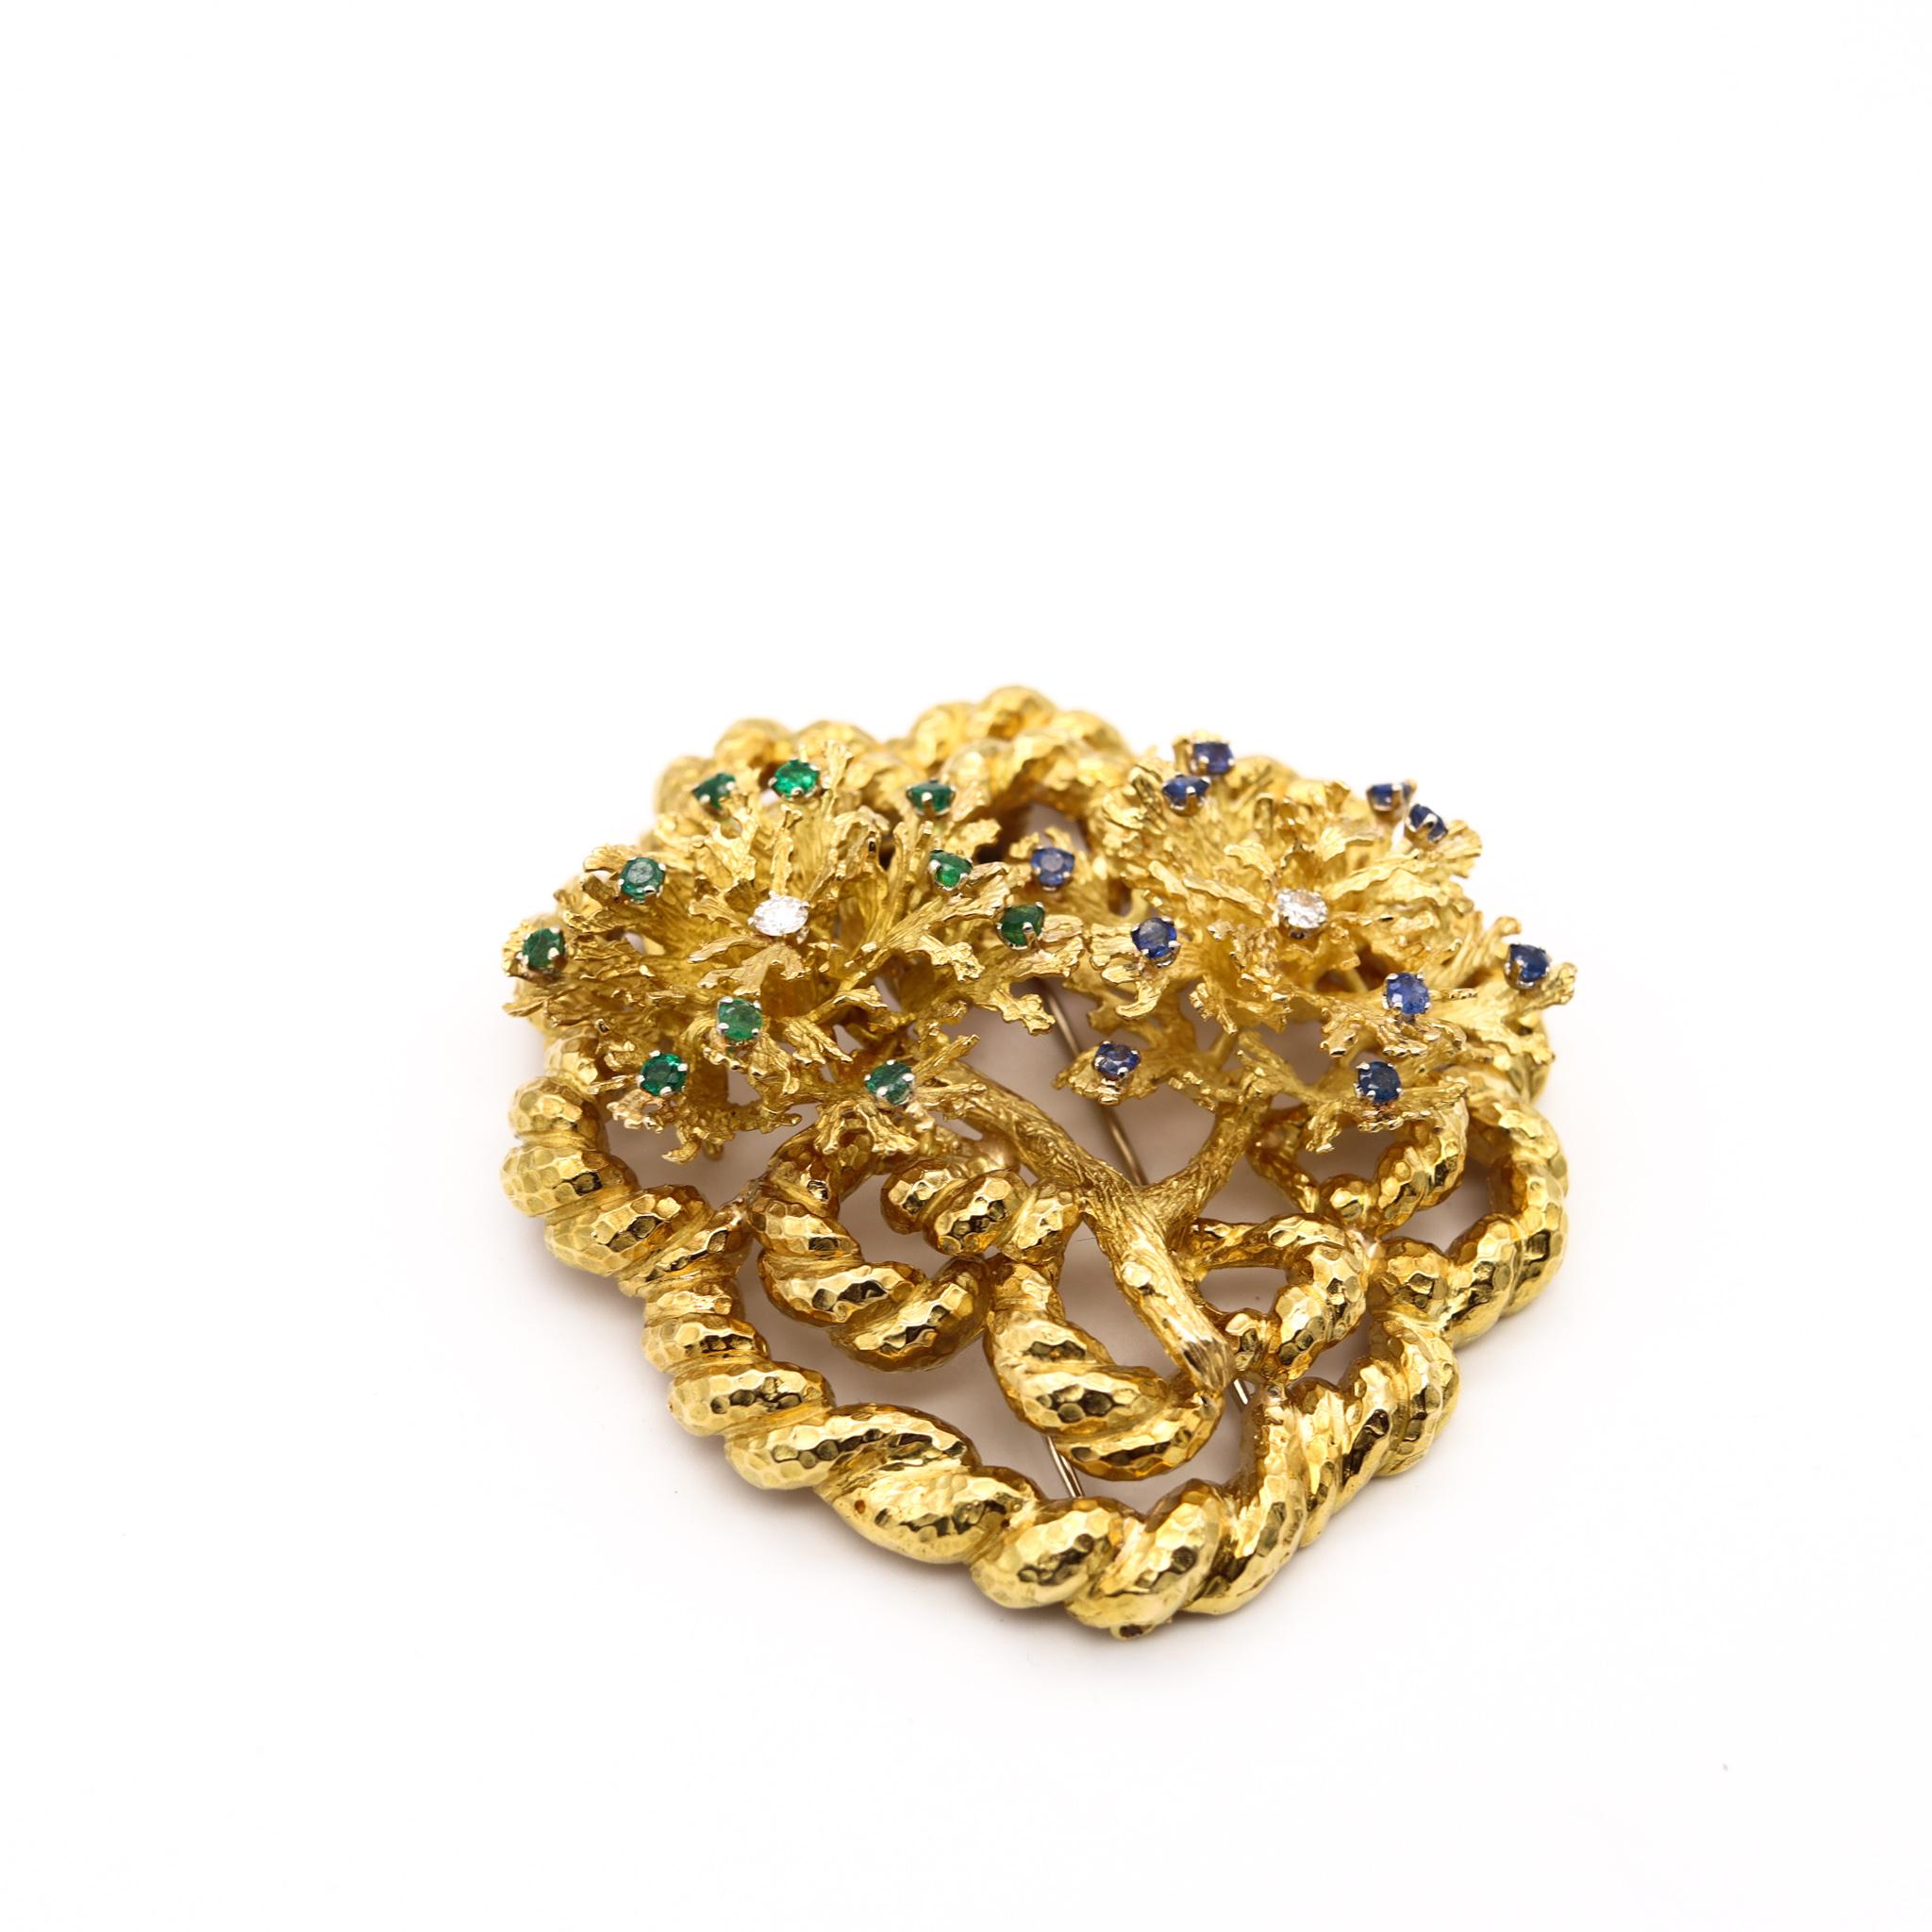 David Webb 1960 New York Pendant-Brooch in 18kt Gold with 2.42 Cts in Gemstones For Sale 2